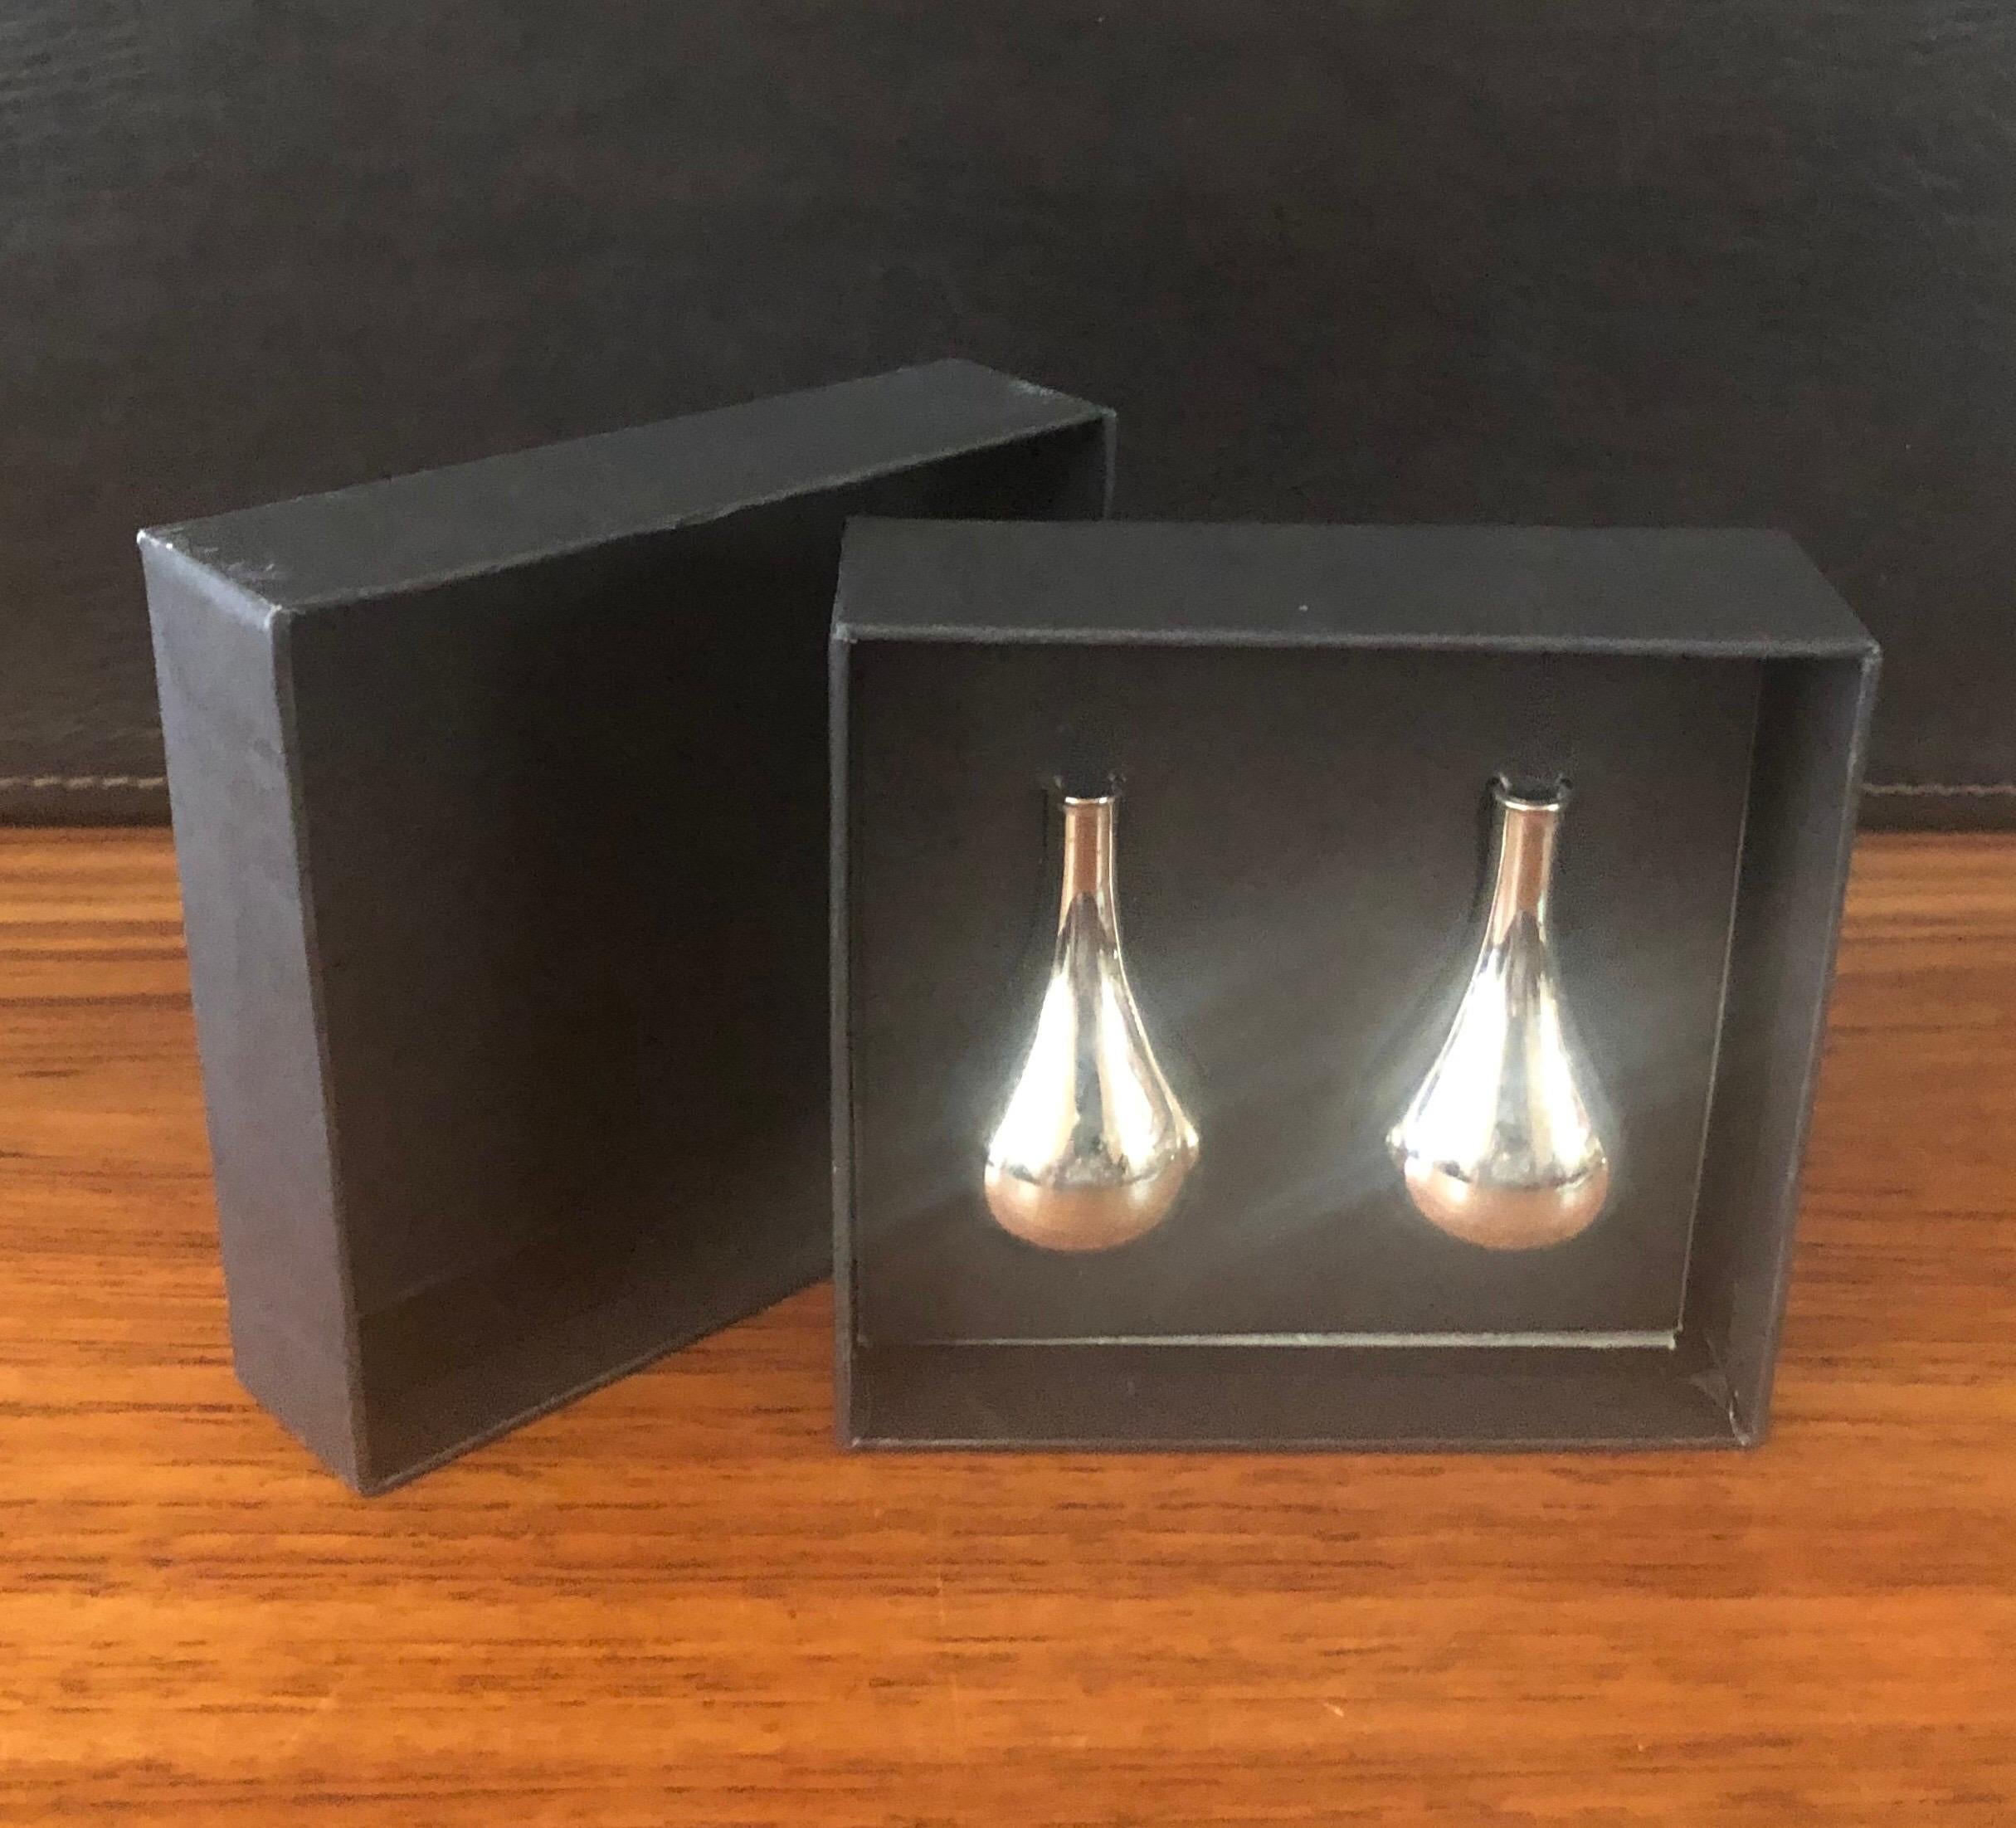 Set of Two Tear Drop Candleholders in Box by Jens Quistgaard for Dansk In Good Condition For Sale In San Diego, CA